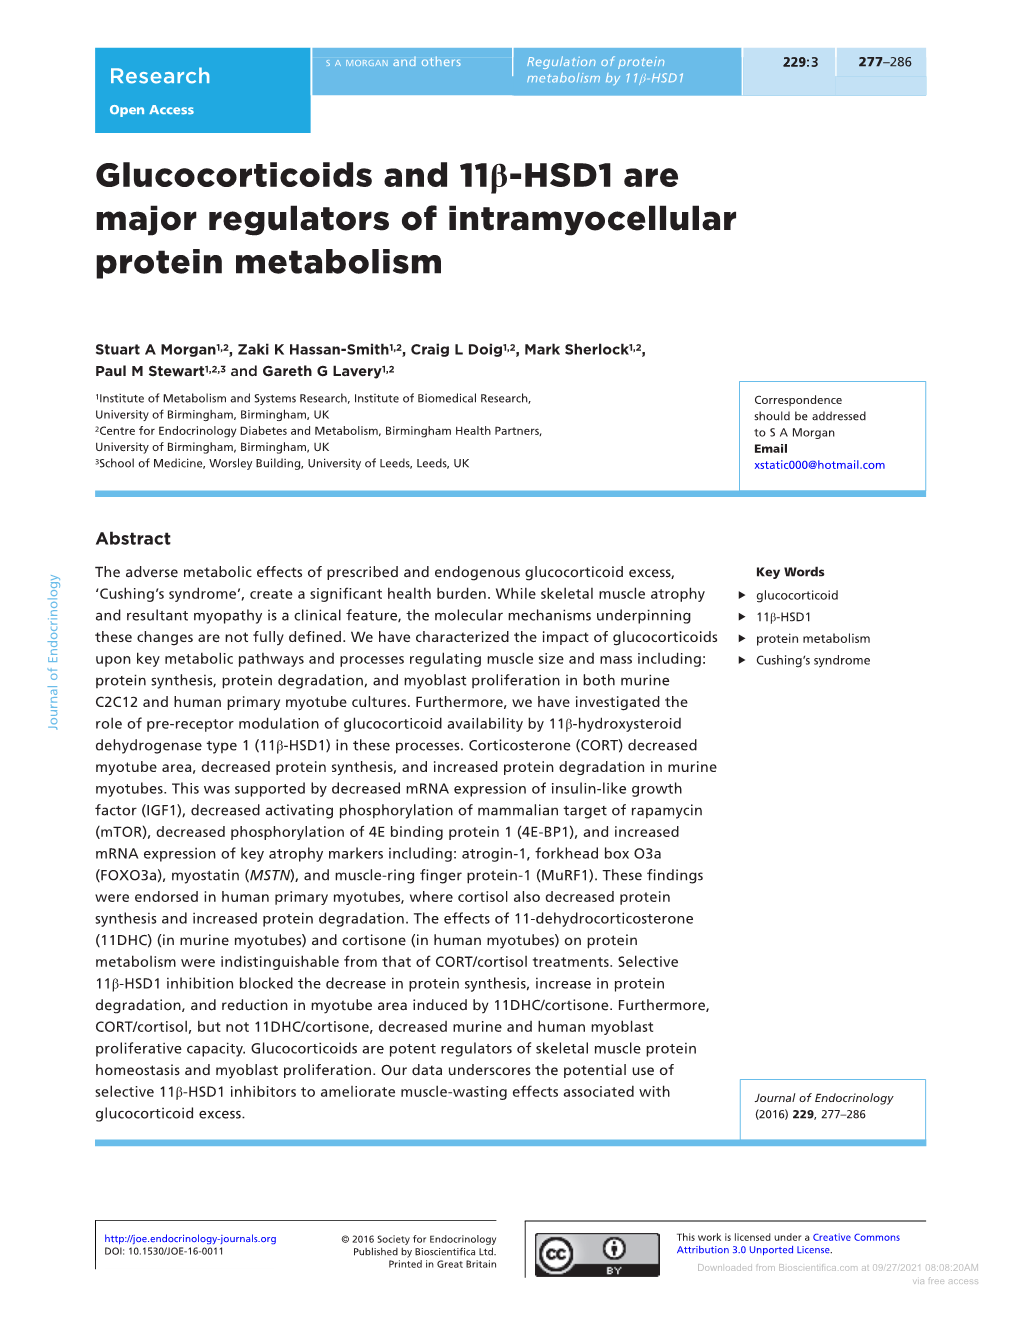 Glucocorticoids and 11Β-HSD1 Are Major Regulators of Intramyocellular Protein Metabolism